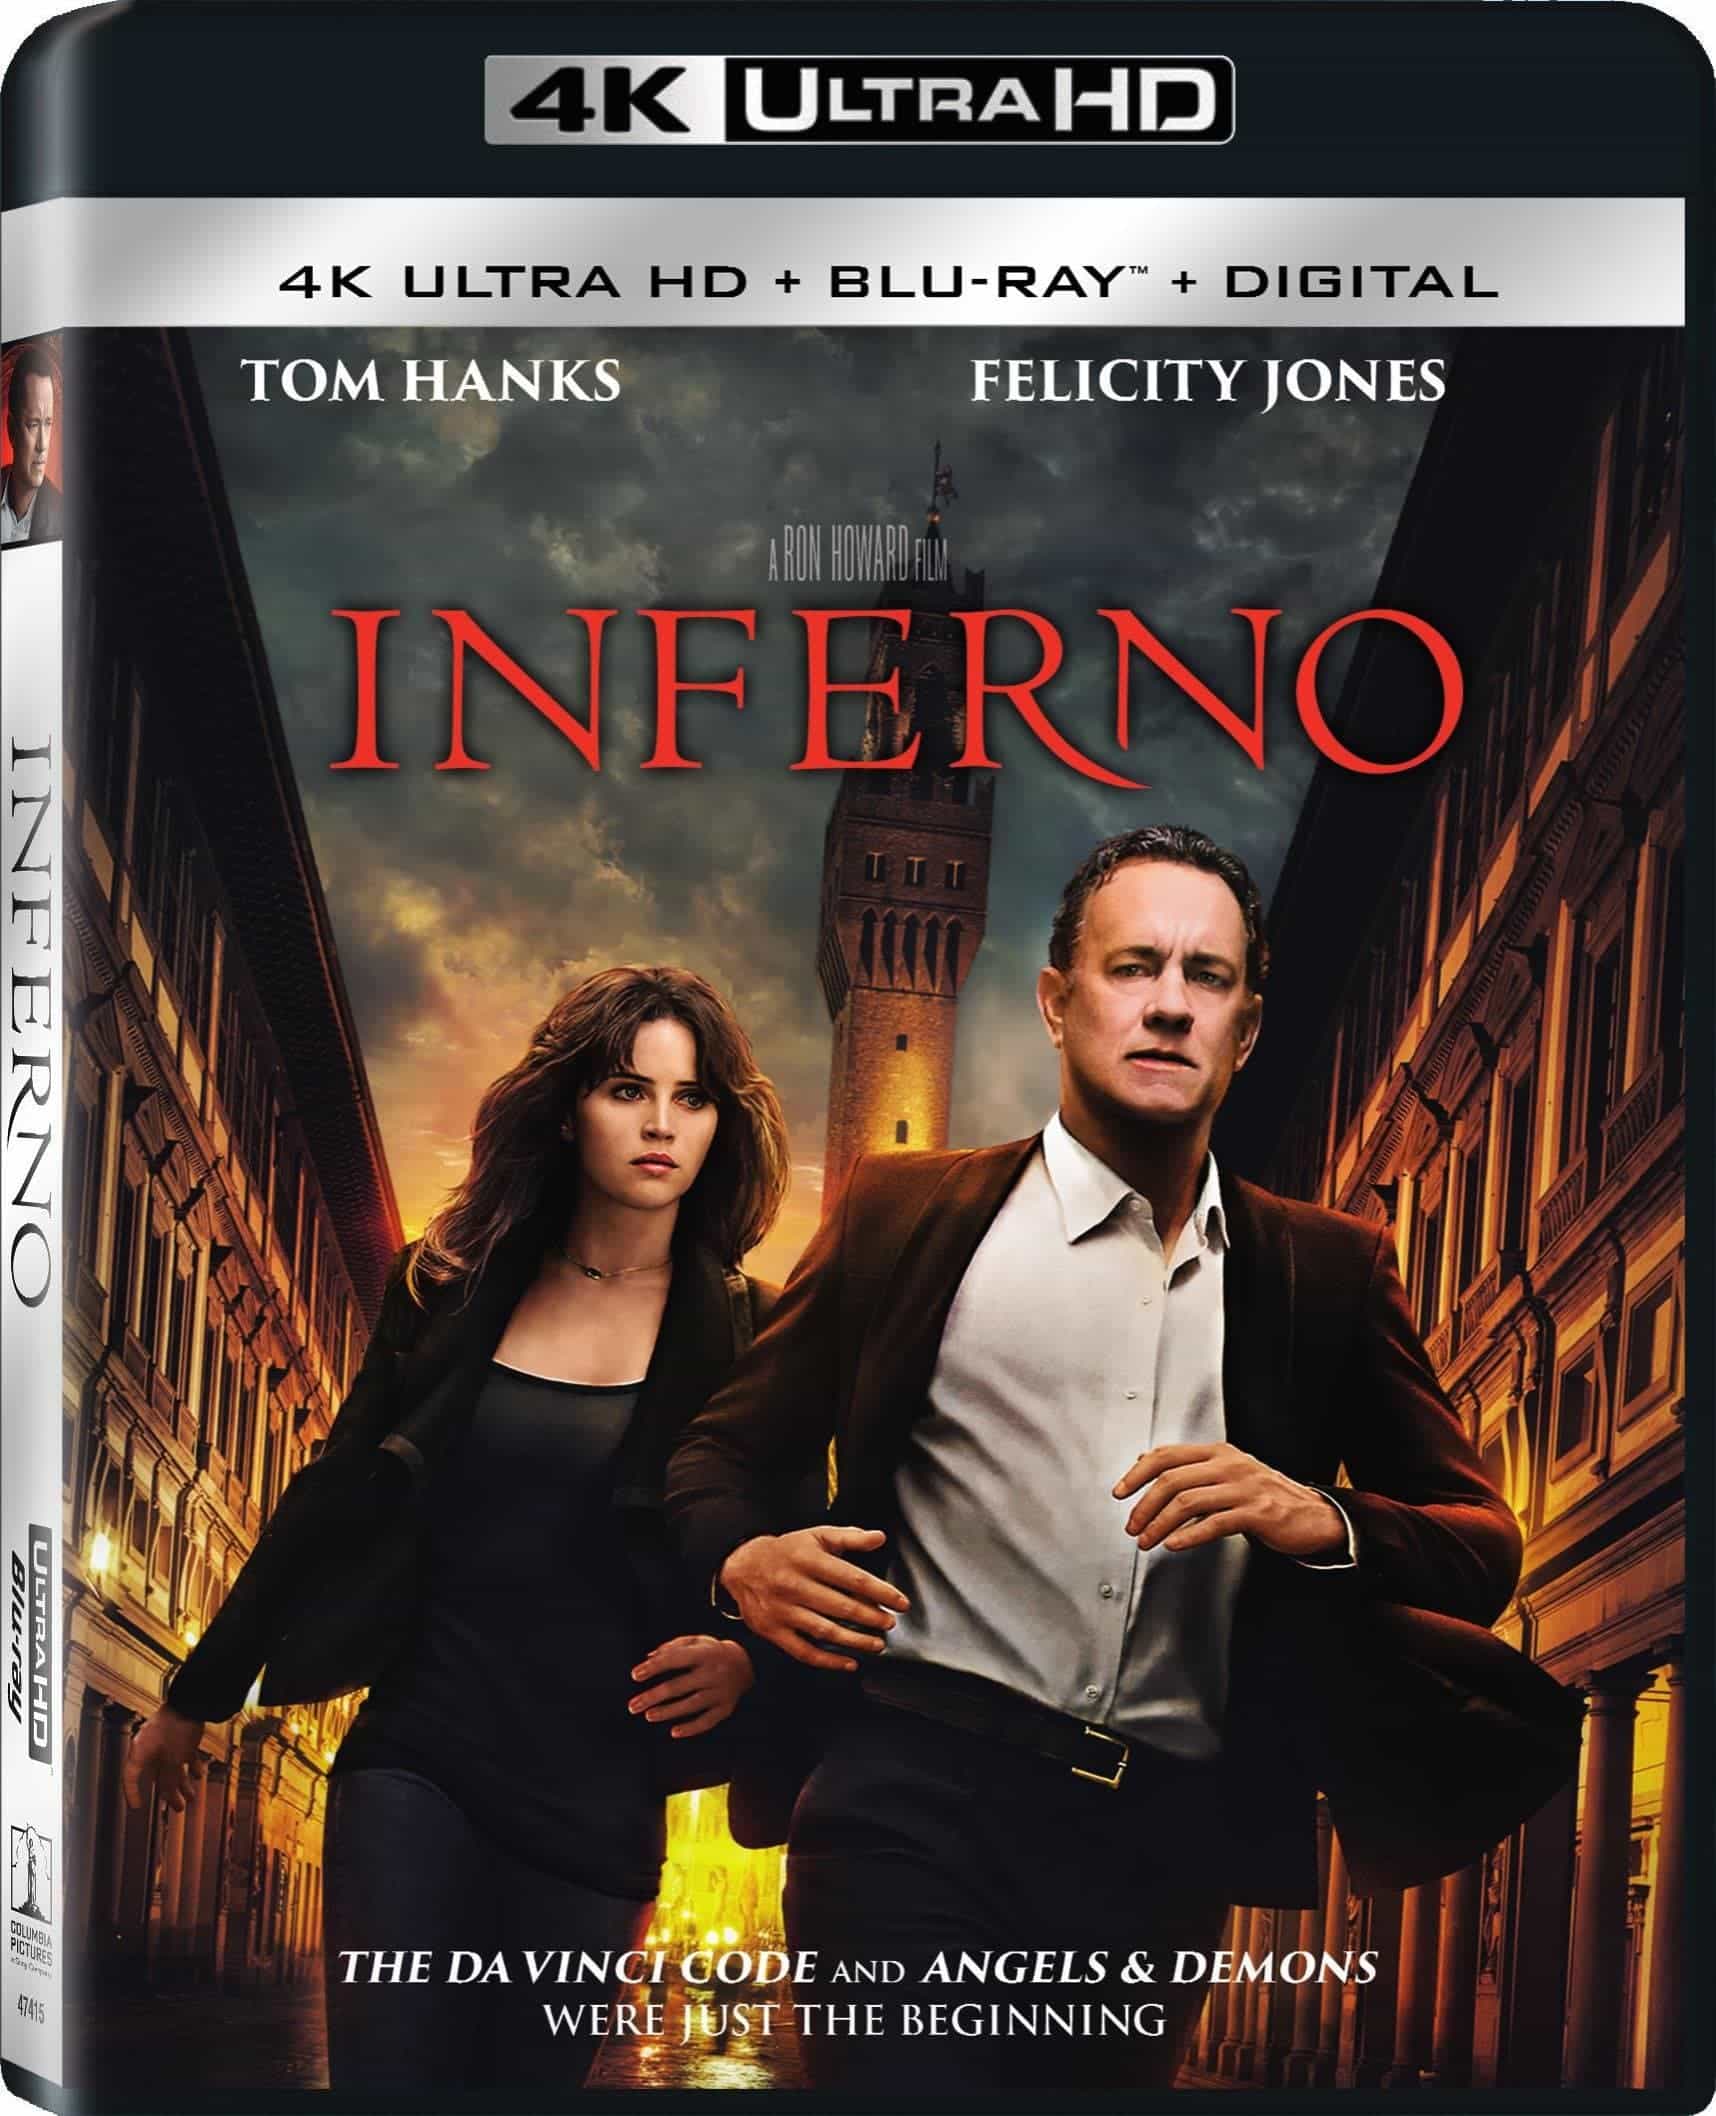 Download Inferno 2016 Full Hd Quality